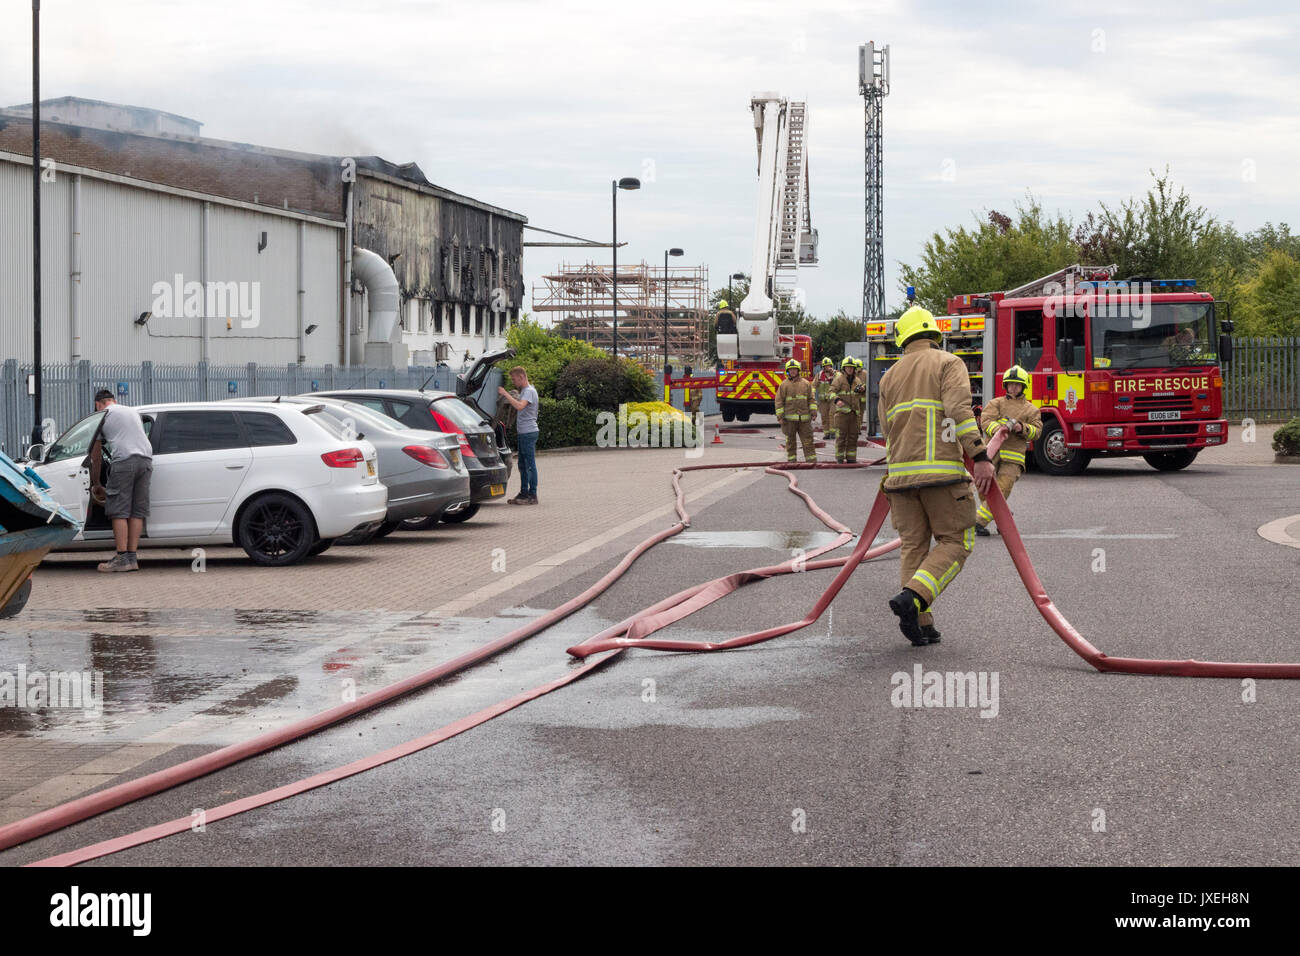 Southend on sea, Essex - Southend - 16 Aug 2017. Airport Fire. A large fire has broken out at the Air Livery hangar based at London Southend Airport at around 11:00 AM Fire crews were quick to respond to the incident. Stock Photo